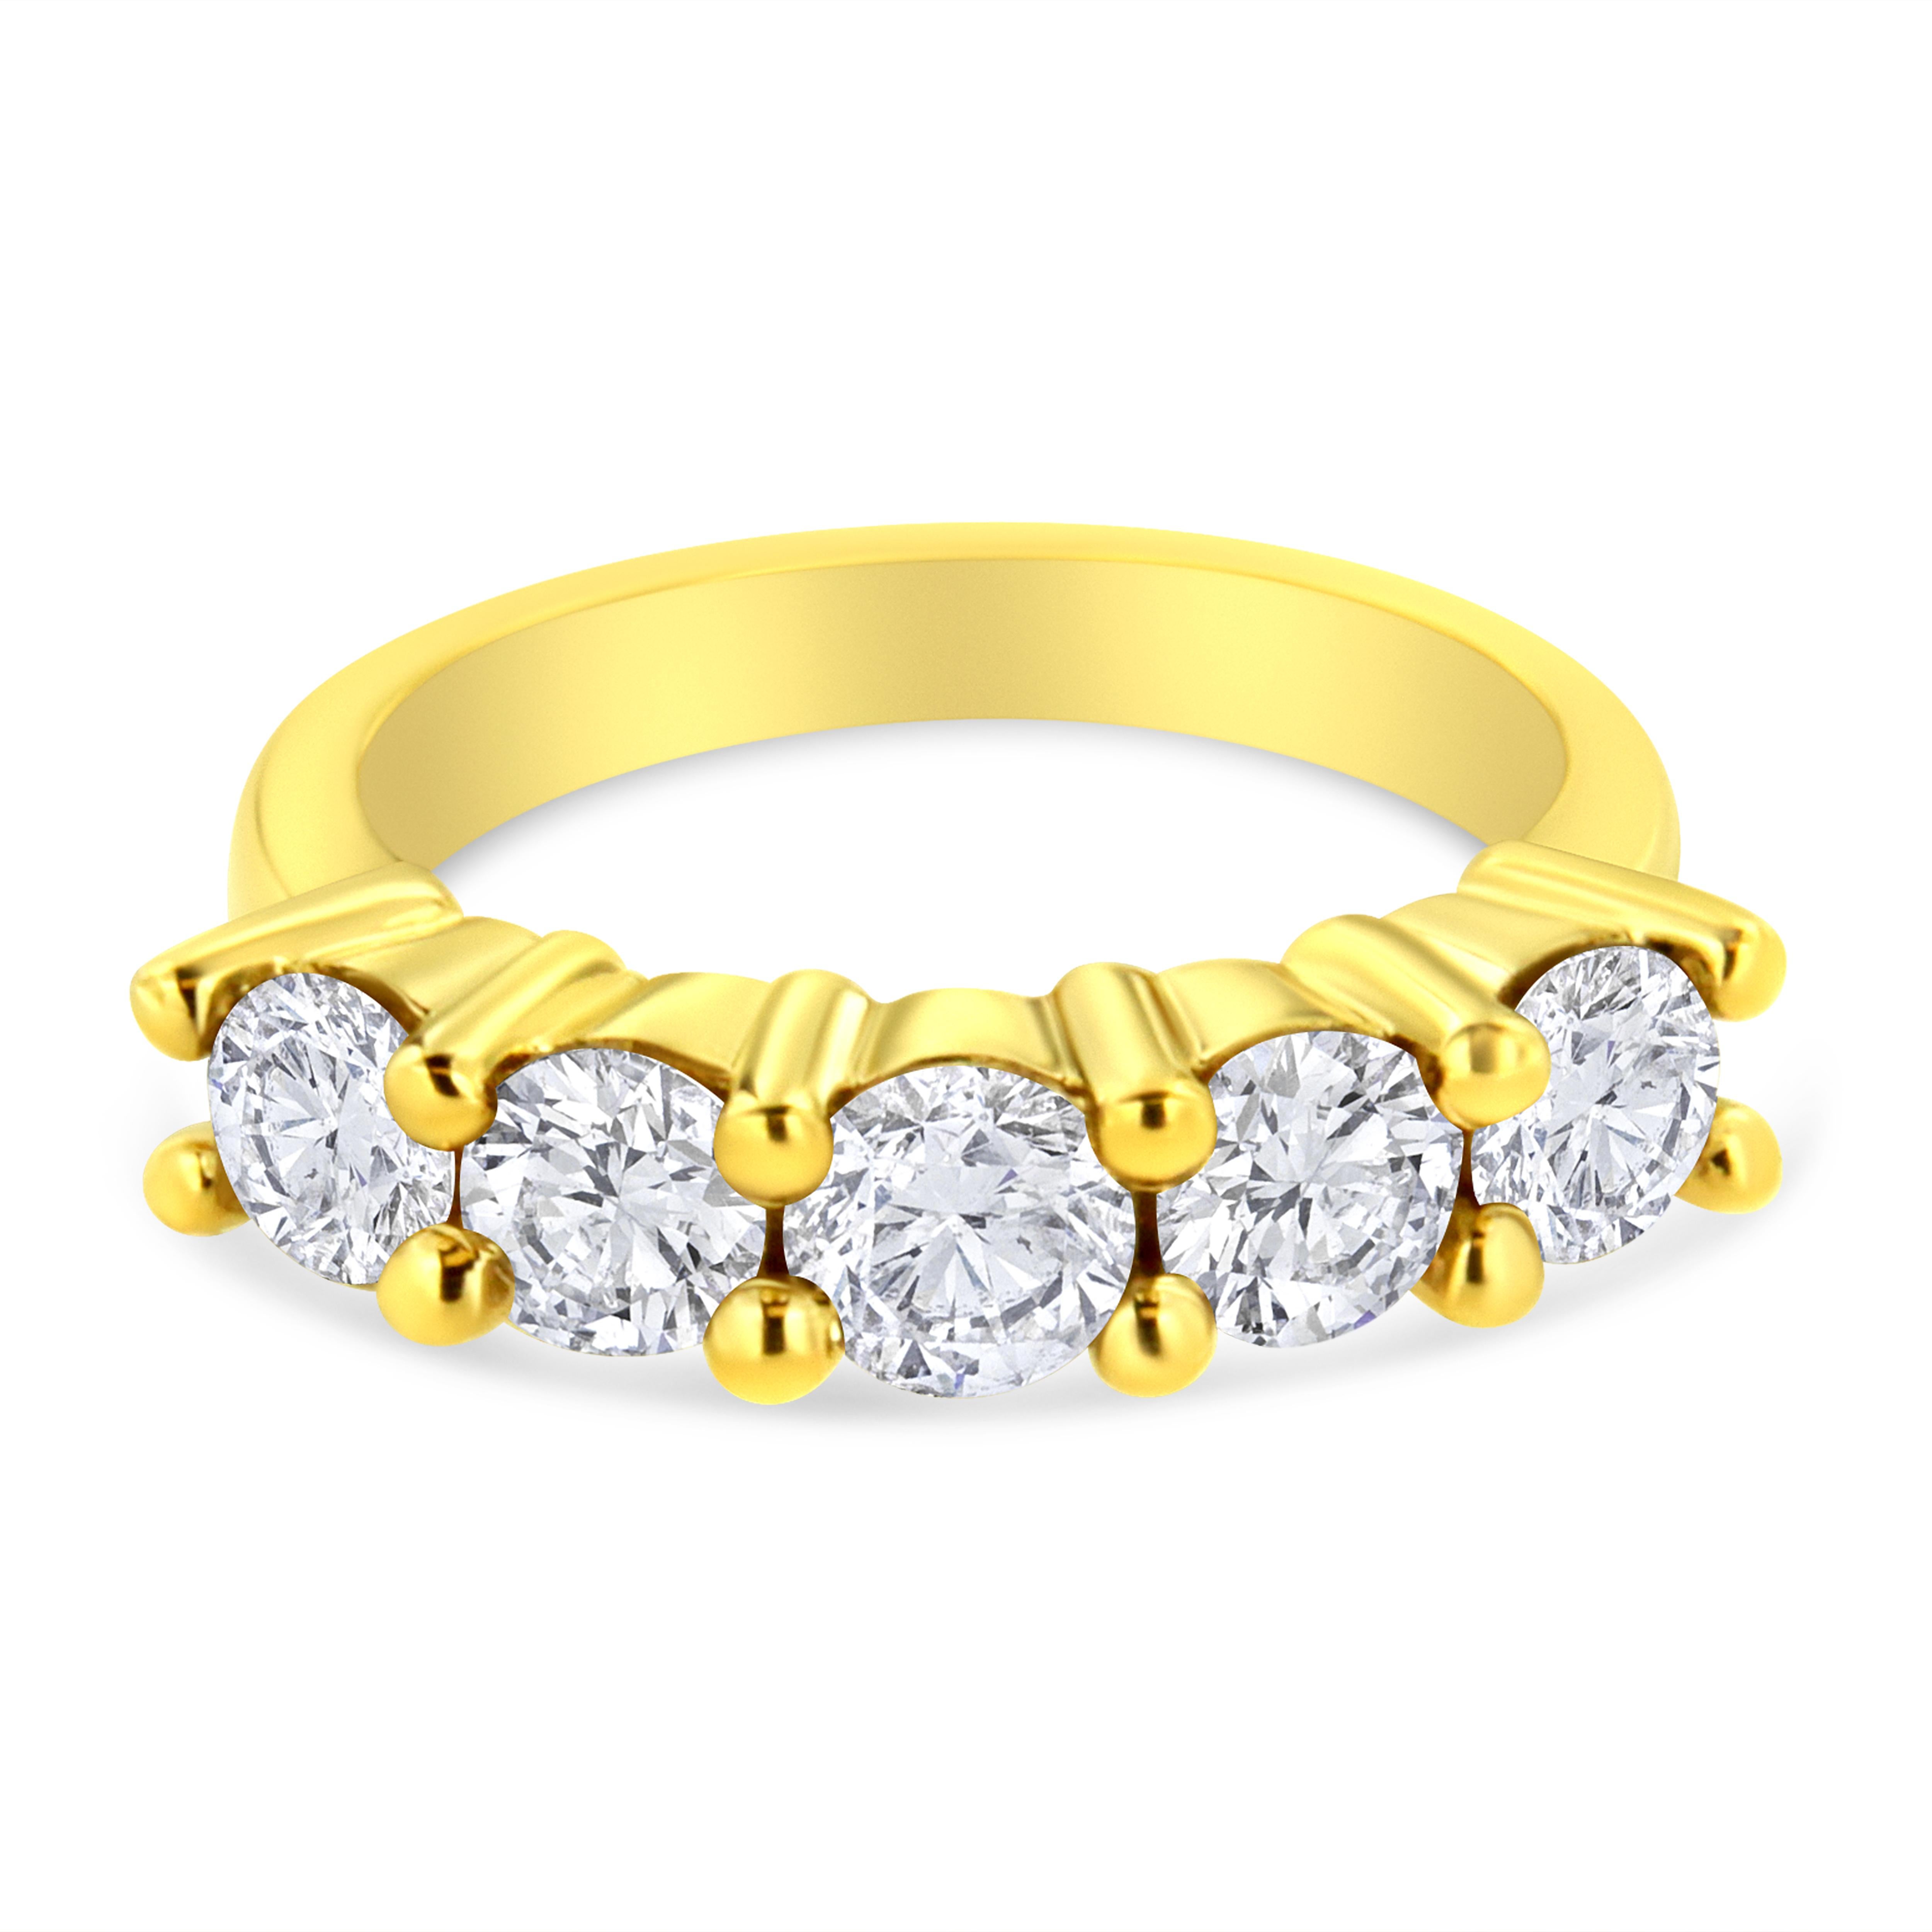 The Eternal five-stone diamond ring is just that, a timeless design that symbolizes a lasting love. Five round brilliant-cut diamonds weighing approximately 2-carat total weight sit securely in shared prongs spanning across the top of the ring. This